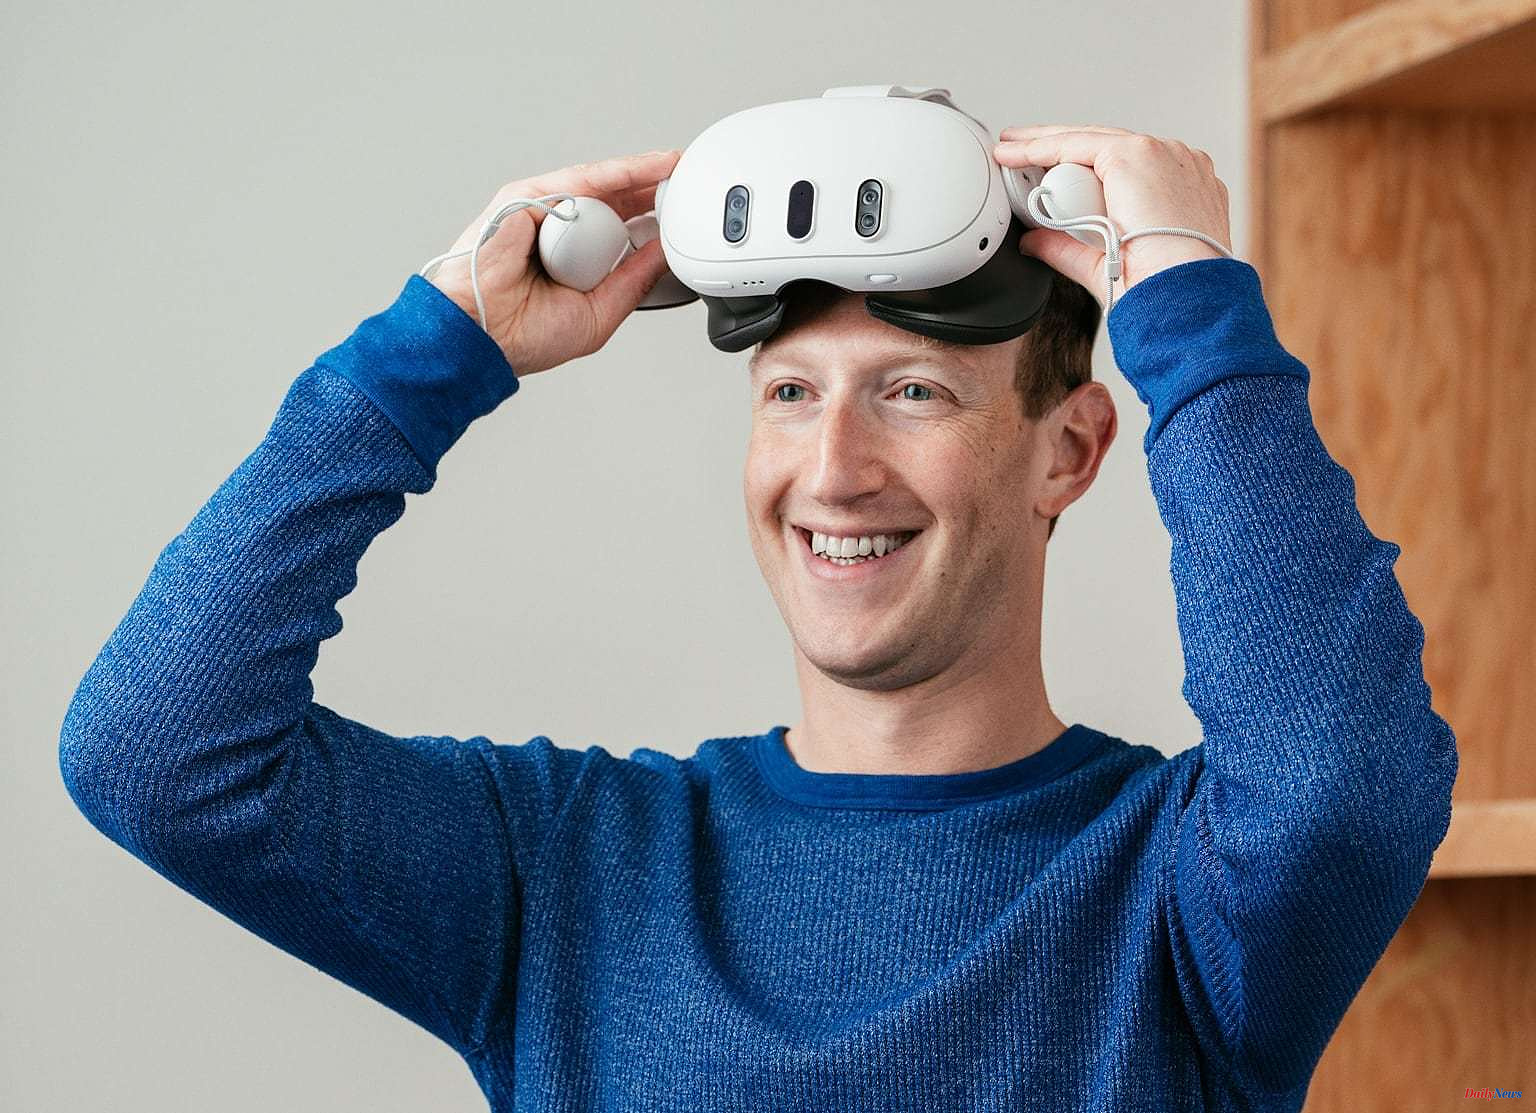 Zuckerberg downplays Apple glasses for his employees: "they don't offer anything really new"